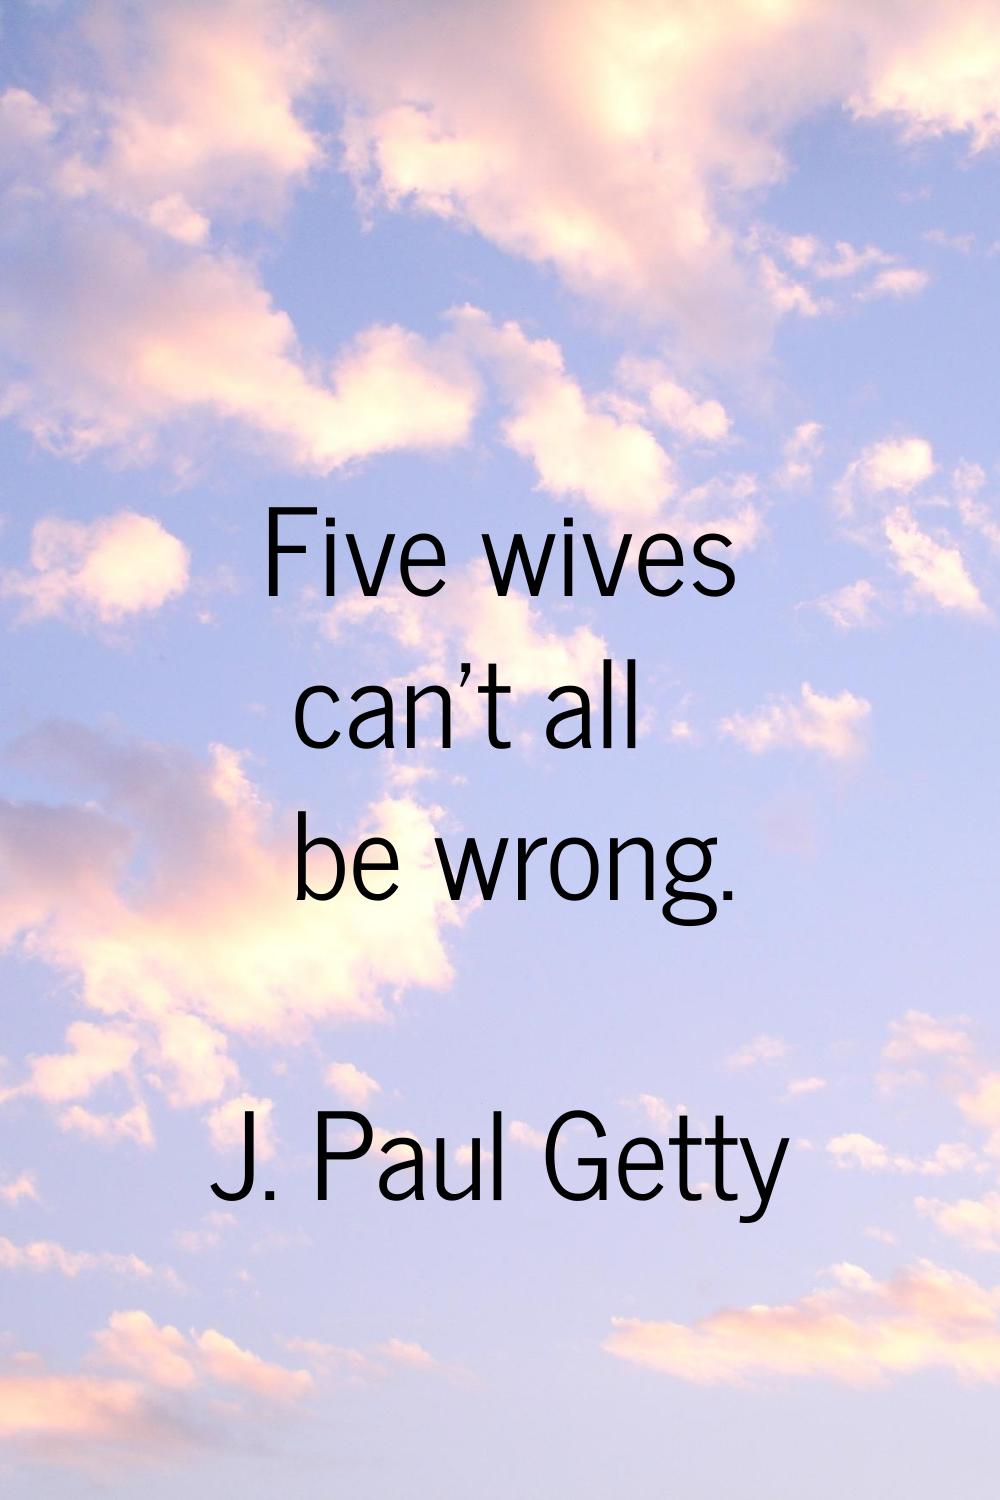 Five wives can't all be wrong.